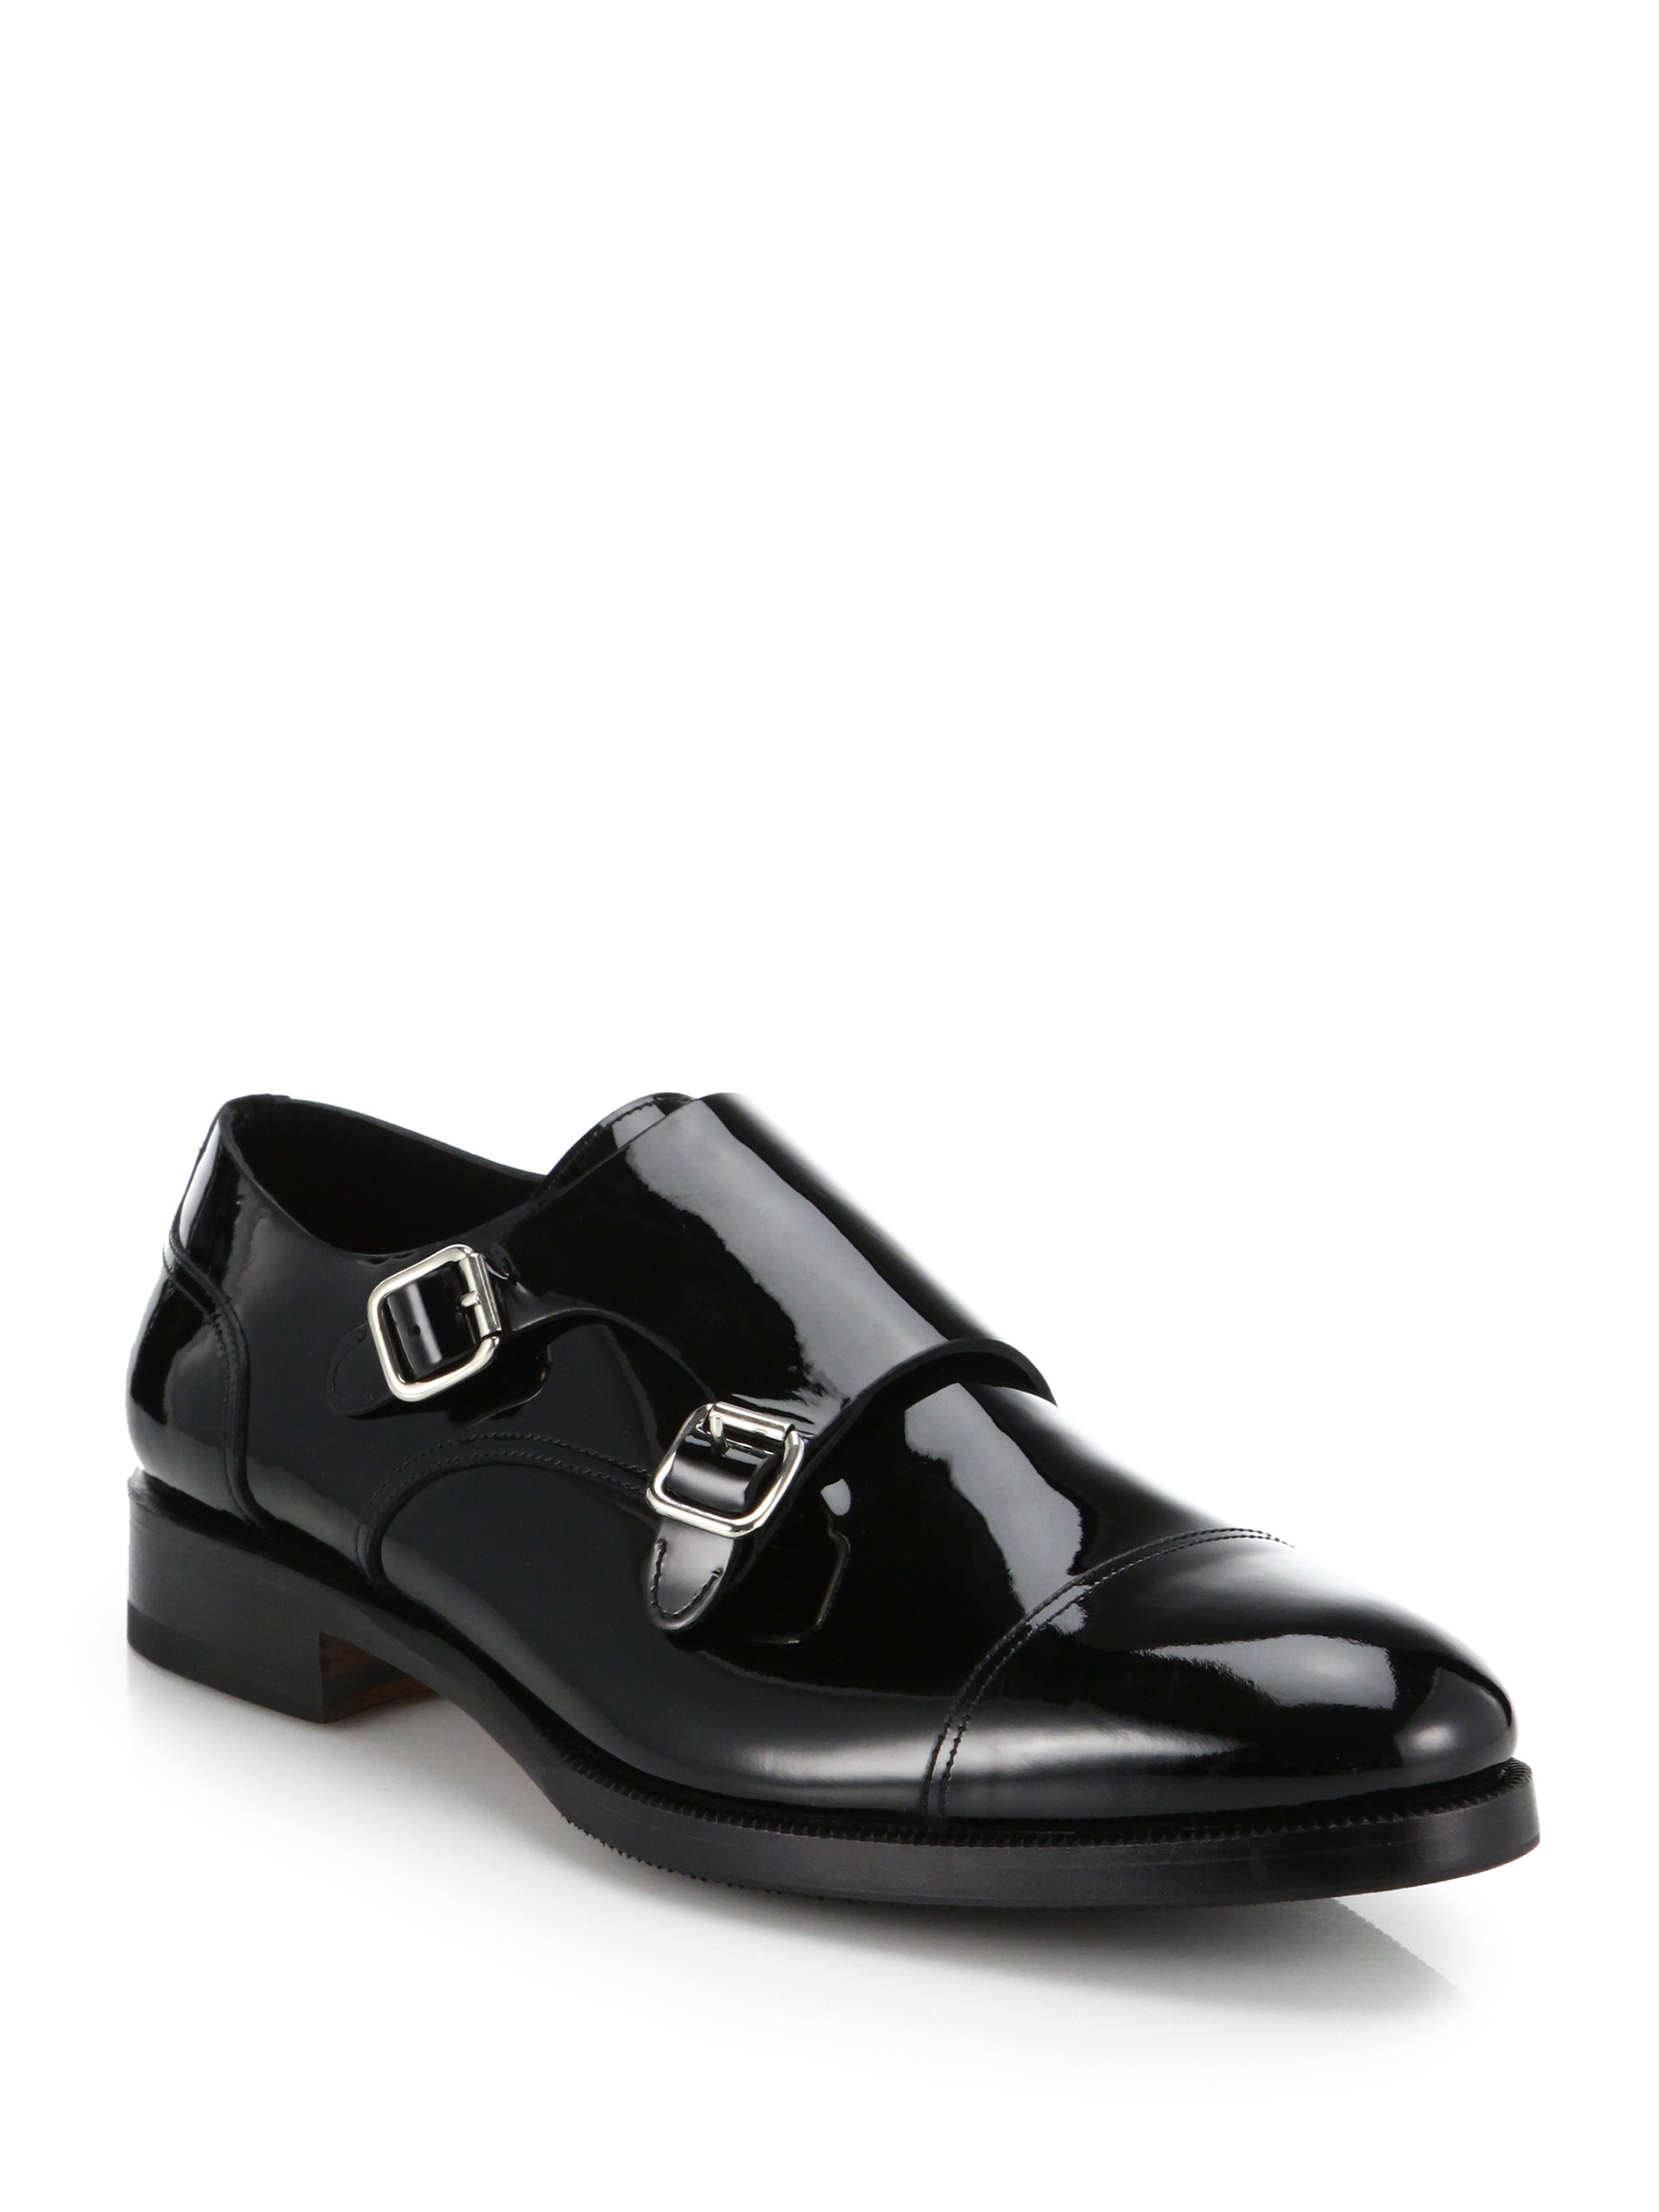 Lyst - Dsquared² Patent Leather Double-buckle Monk Strap Shoes in Black